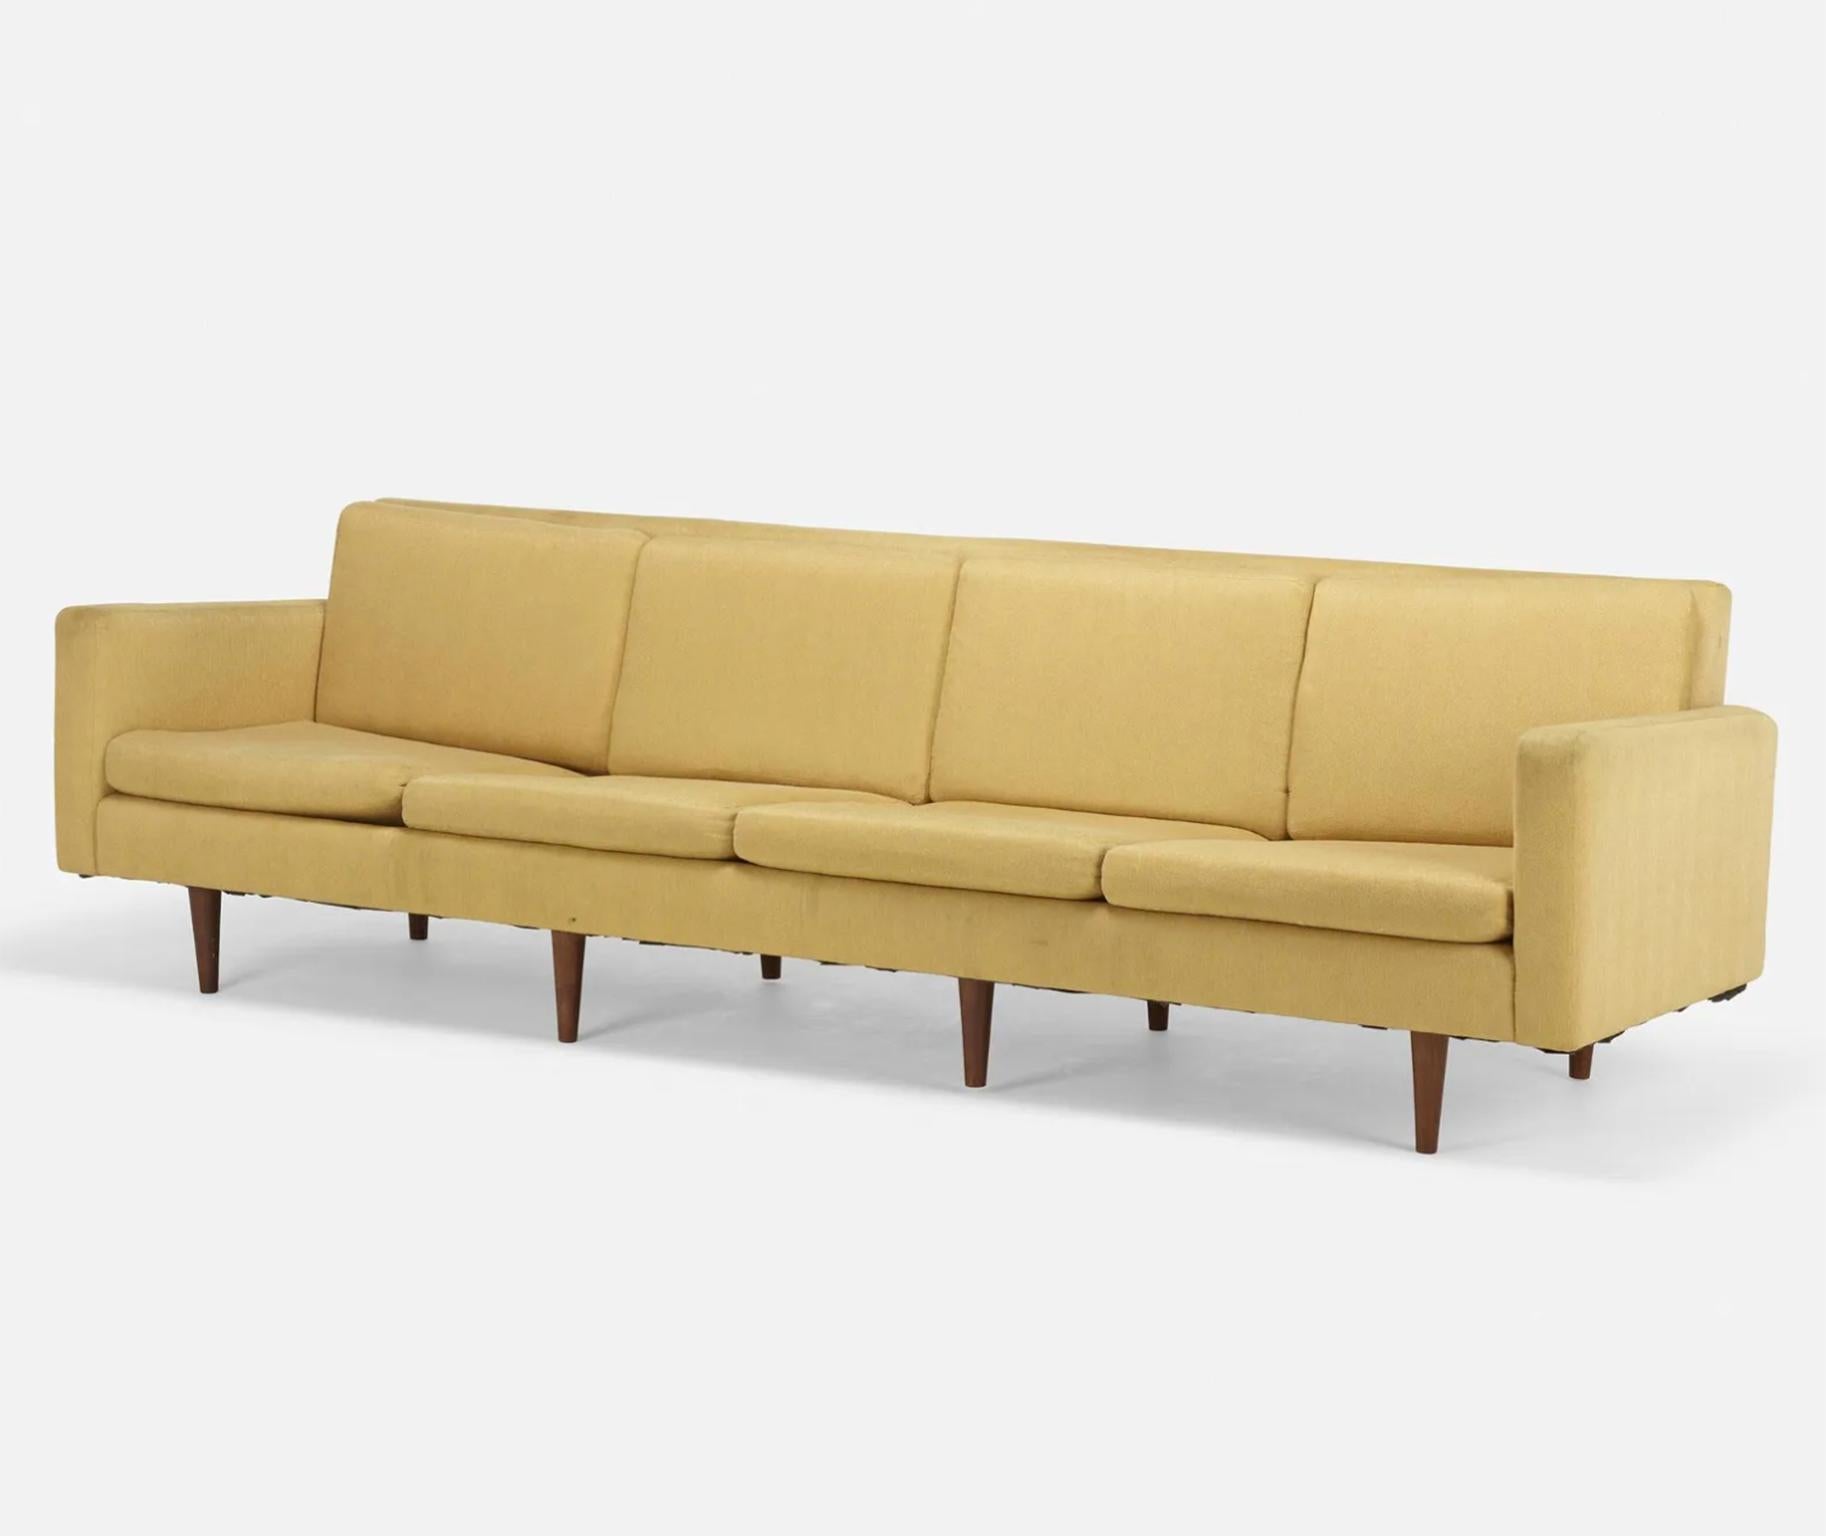 Beautiful 1955 Danish Sofa designed by Johannes Aasbjerg has original upholstery with a 4 seat design. Long 106 inch long sofa. Sits on 8 Solid teak tapered legs. Use As-Is or have it Fully Upholstered. Great lines - beautiful design. Located in